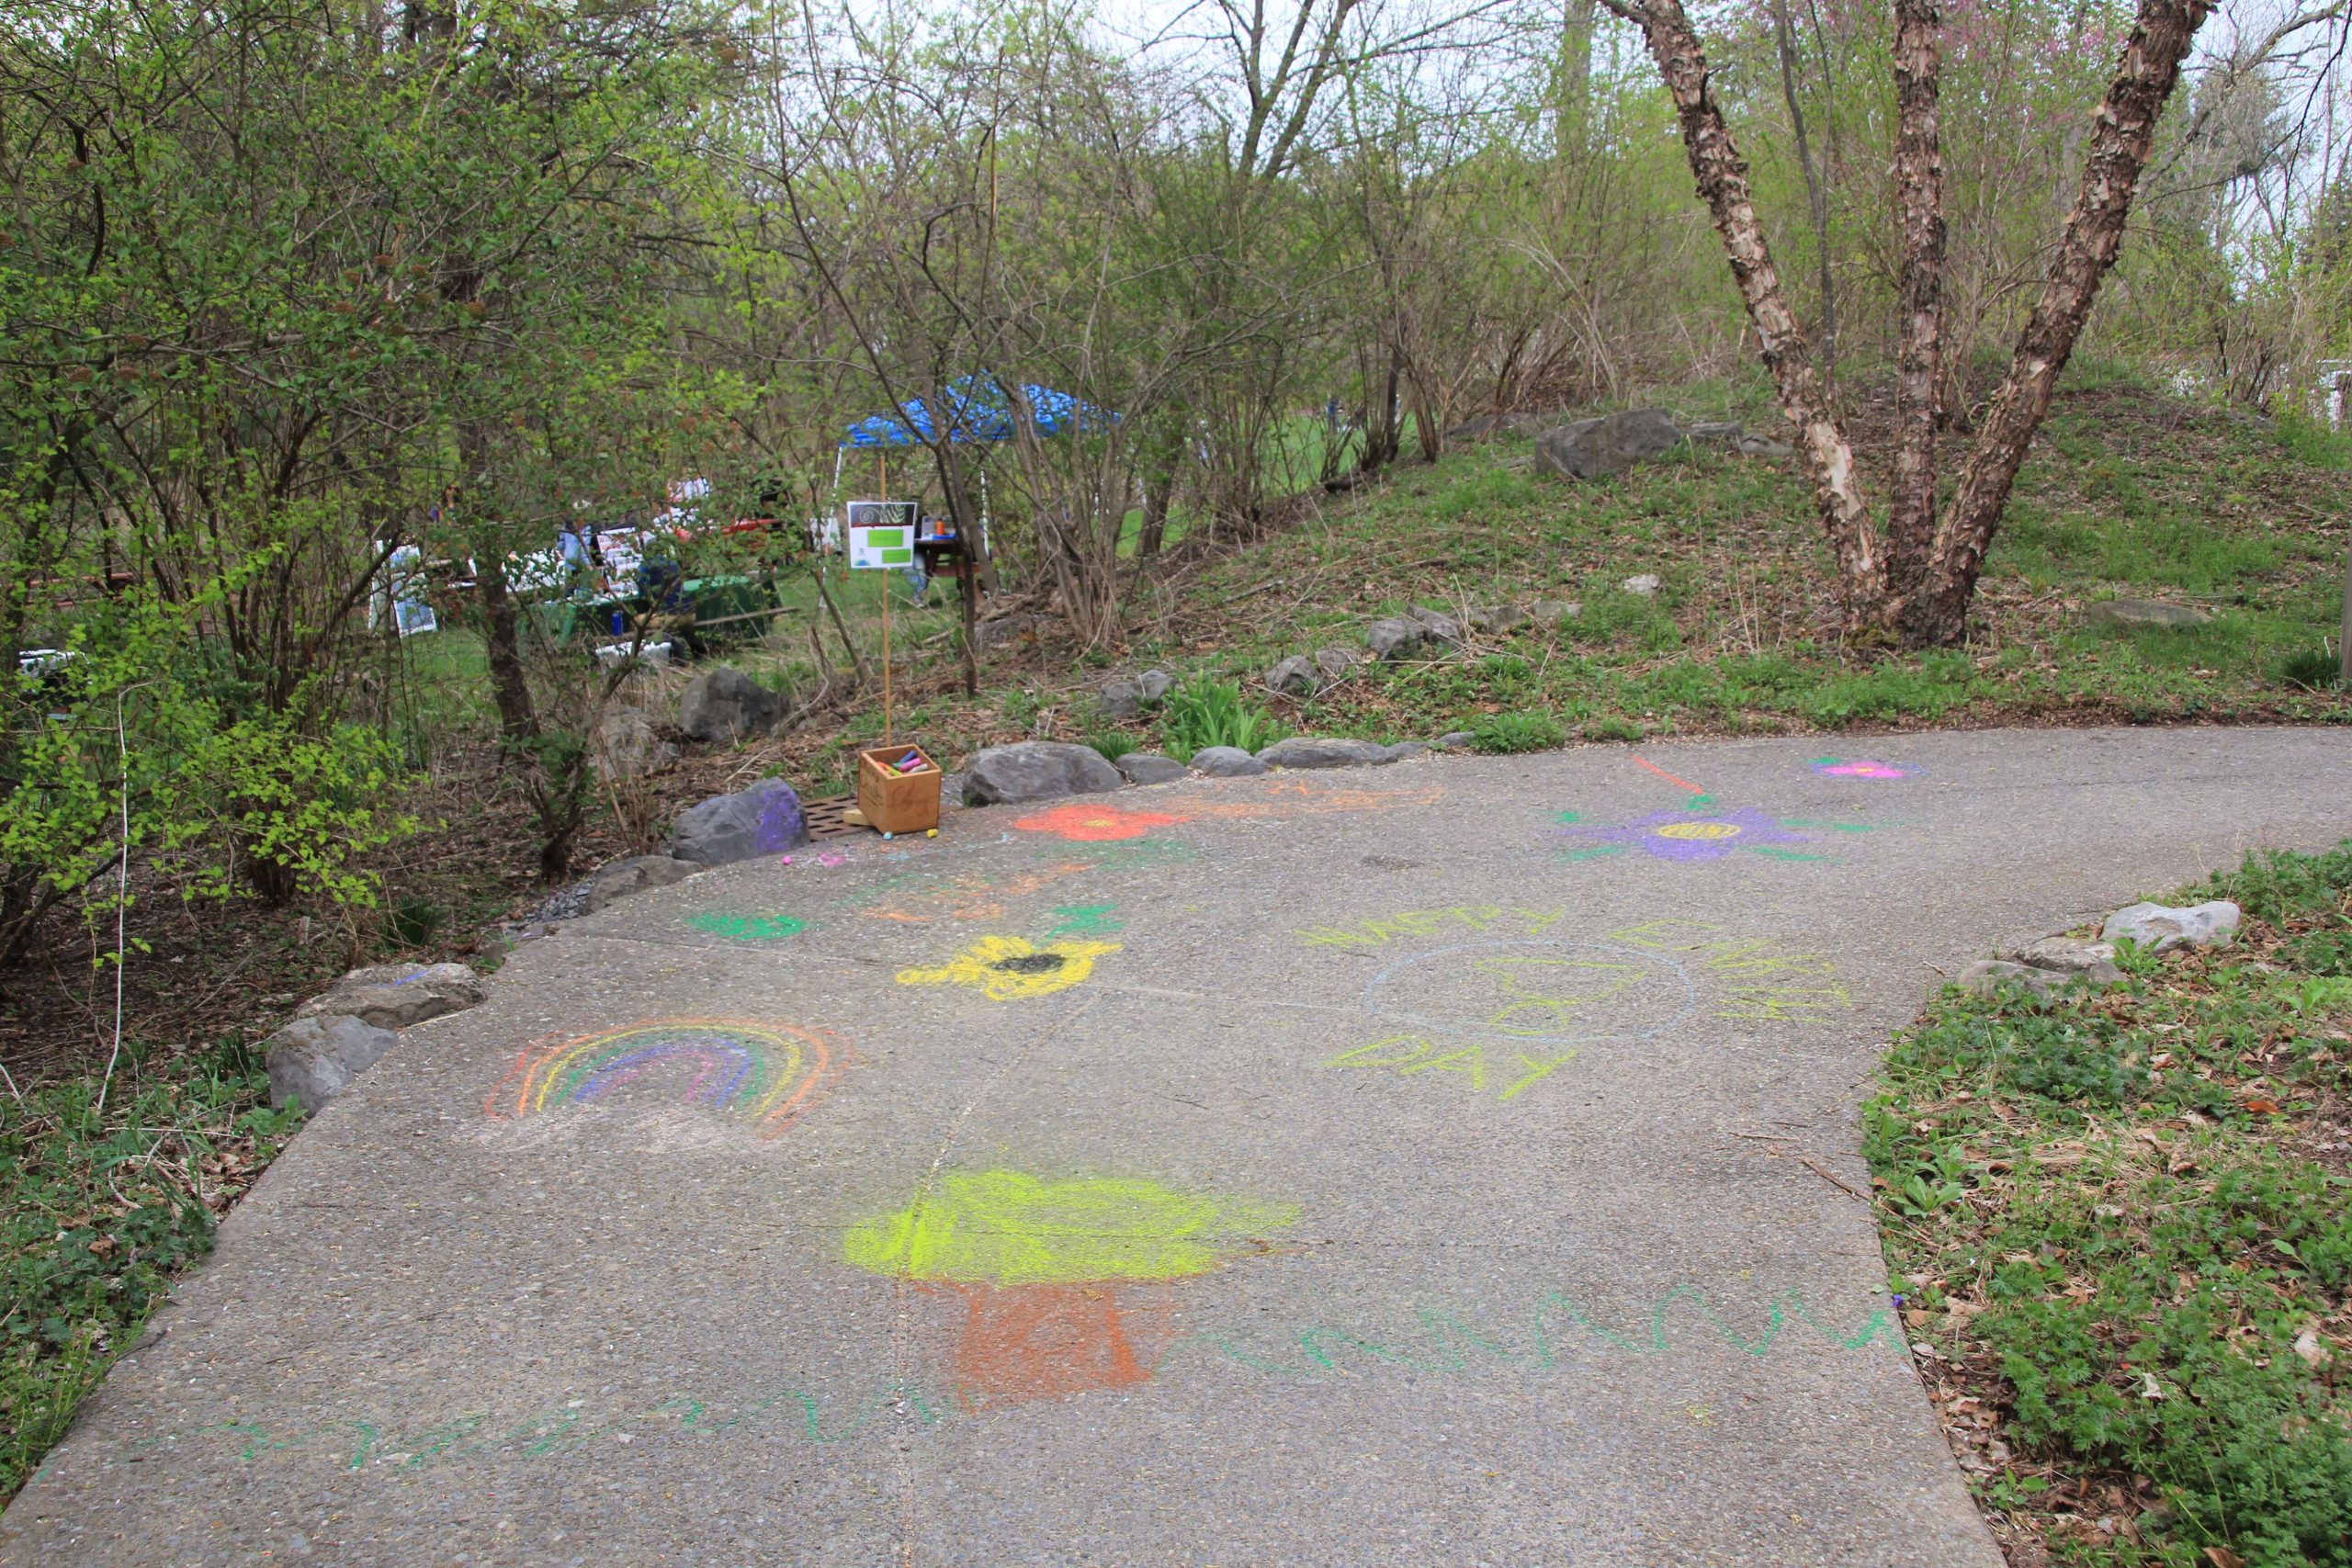 Chalk drawing at the 2023 Earth Day Celebration at Baltimore Woods.